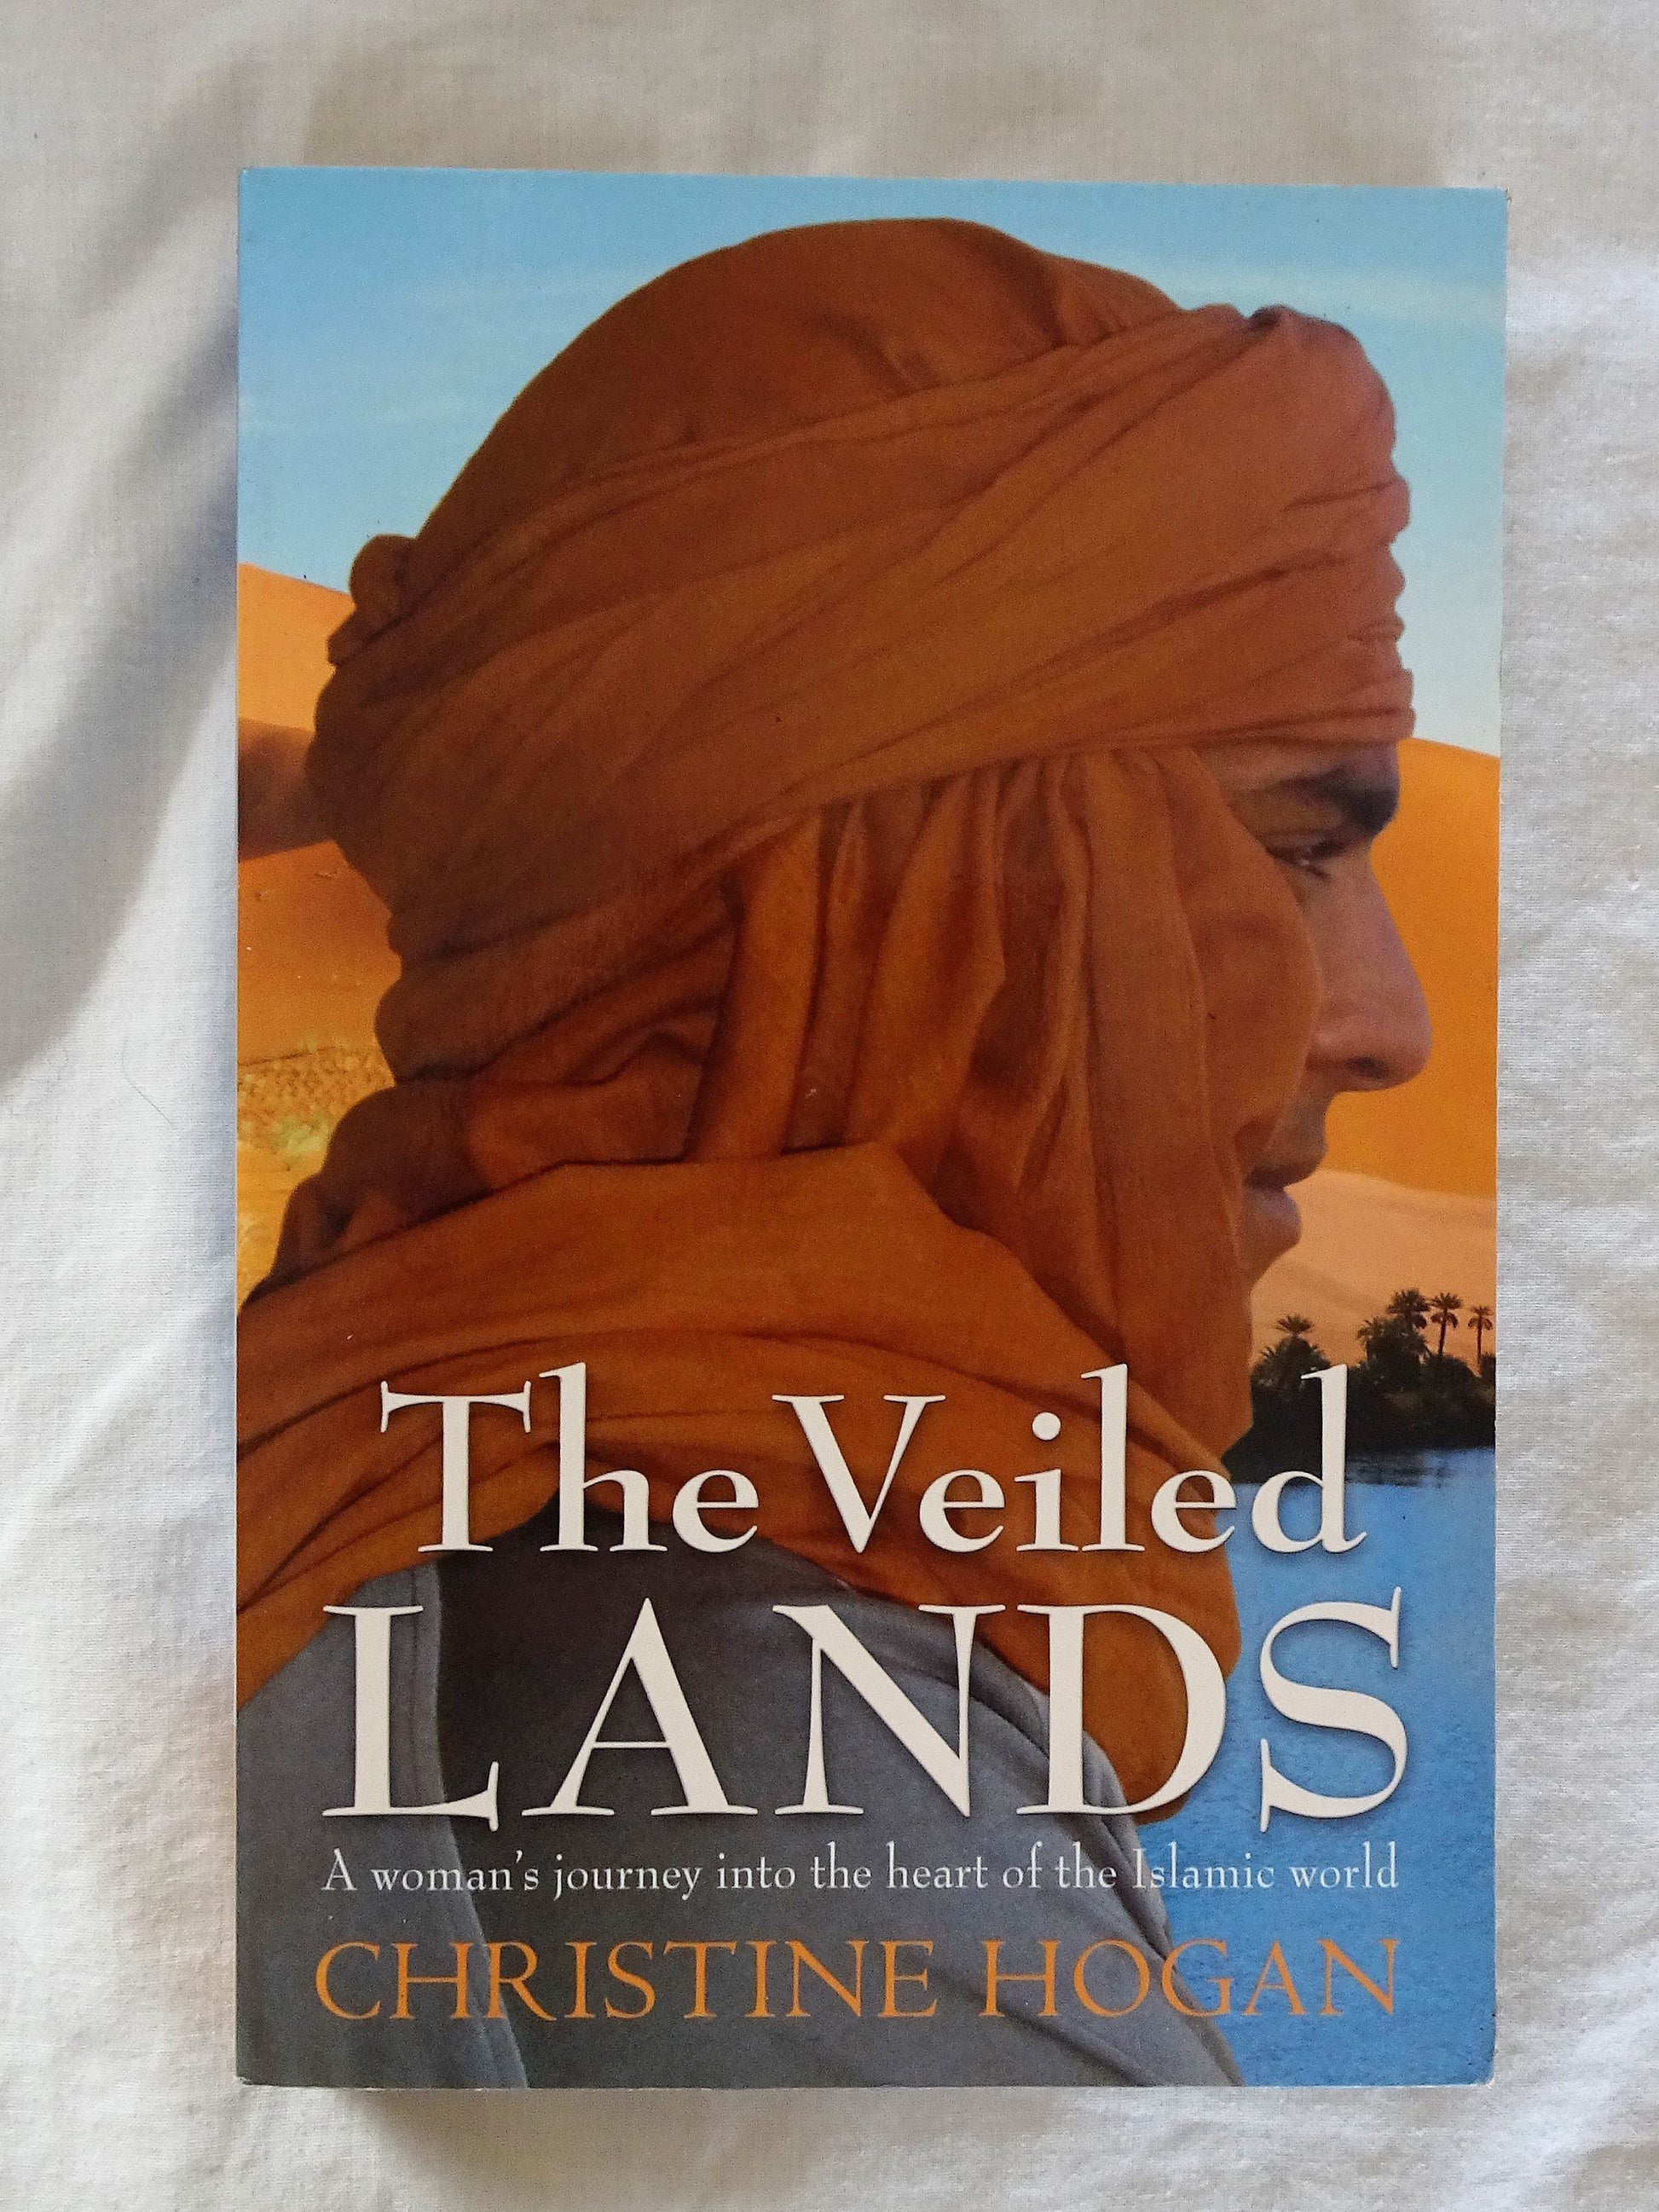 The Veiled Lands  A woman's journey into the heart of the Islamic world  by Christine Hogan